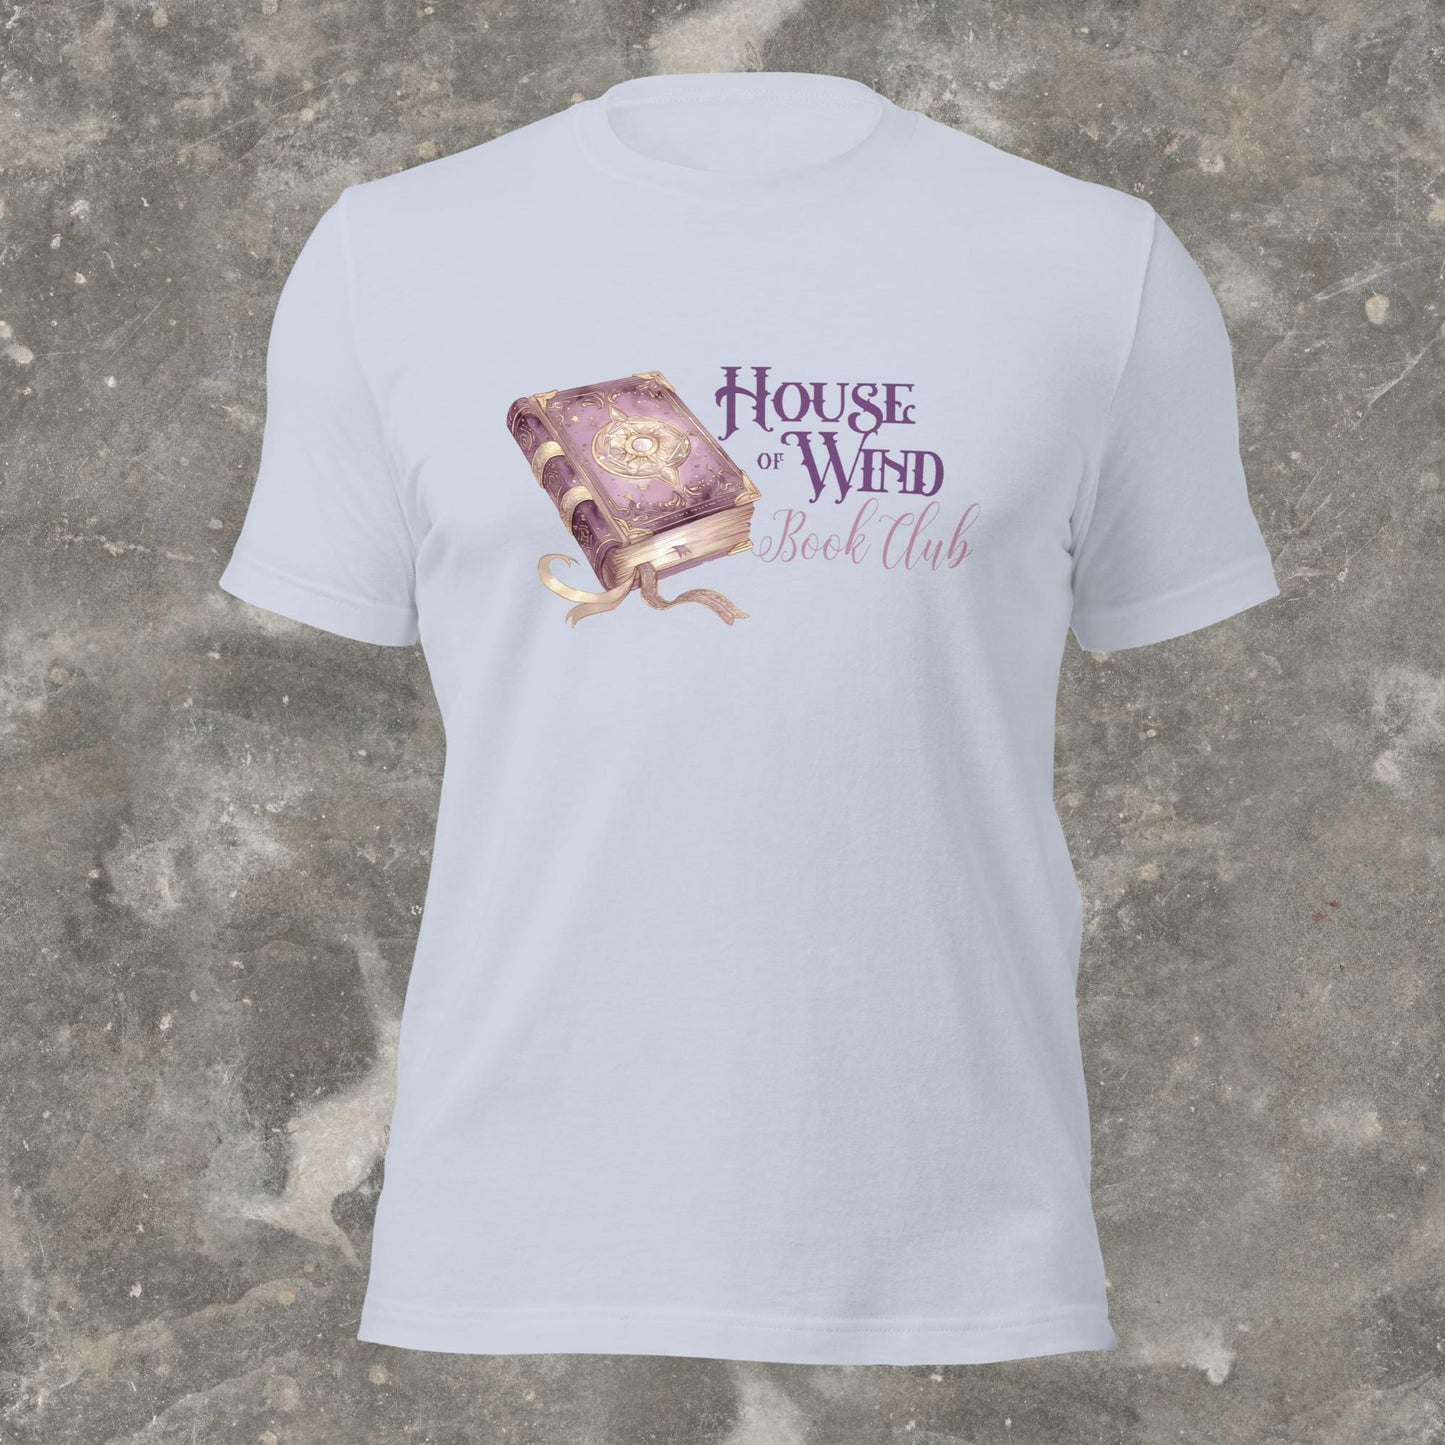 House of Wind ACOTAR Court of Thorns and Roses Velaris Gender Neutral Fit Shirt Plus Sizes Available